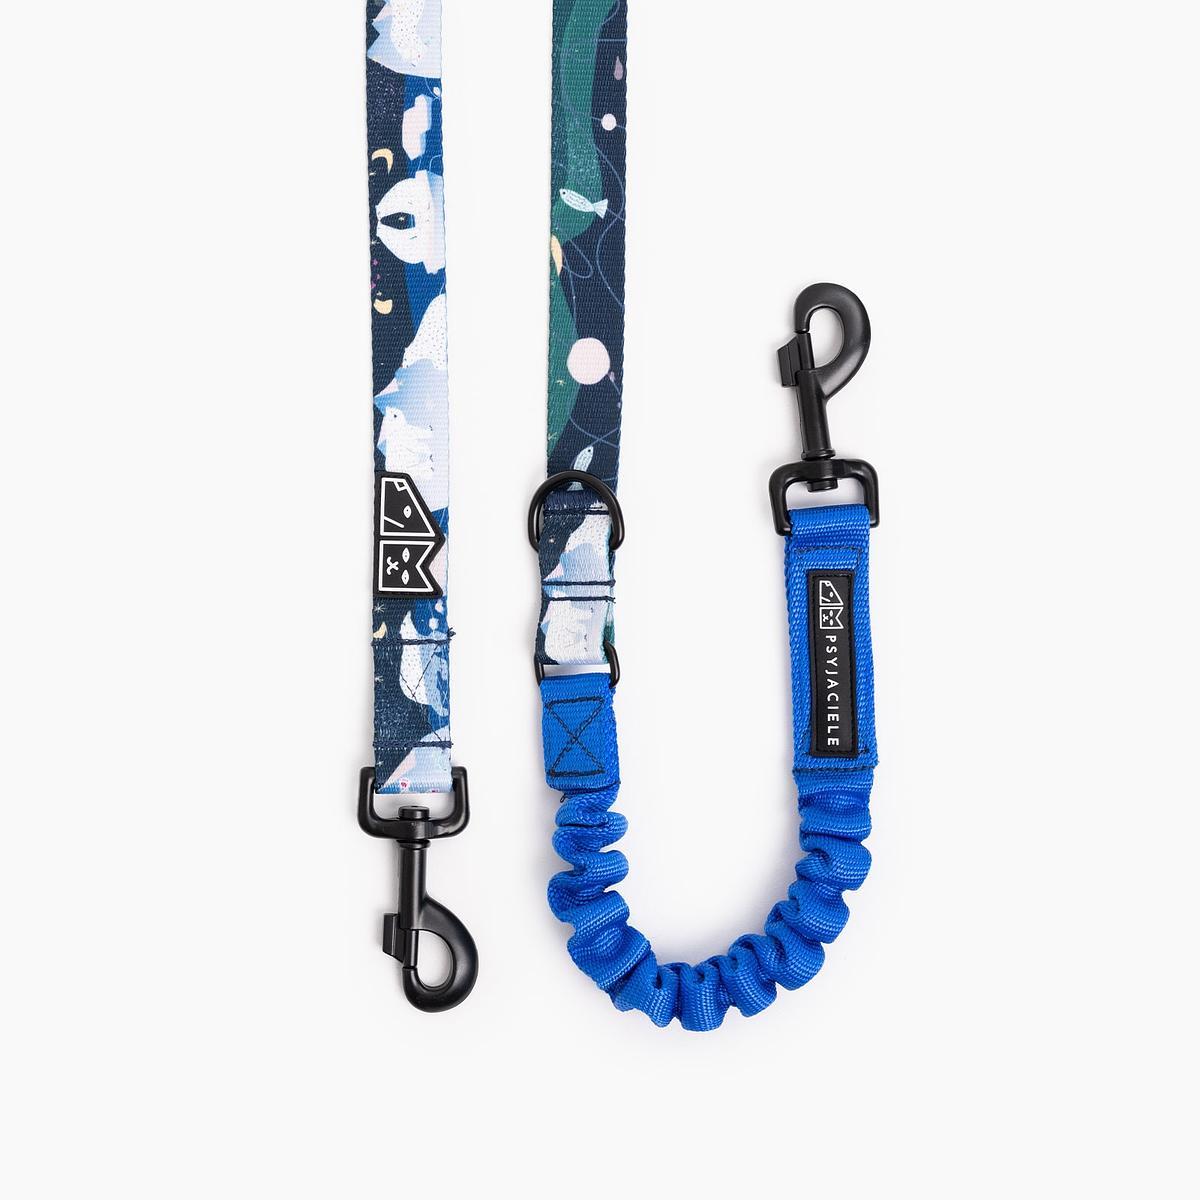 "Polar pattern" leash with a shock absorber